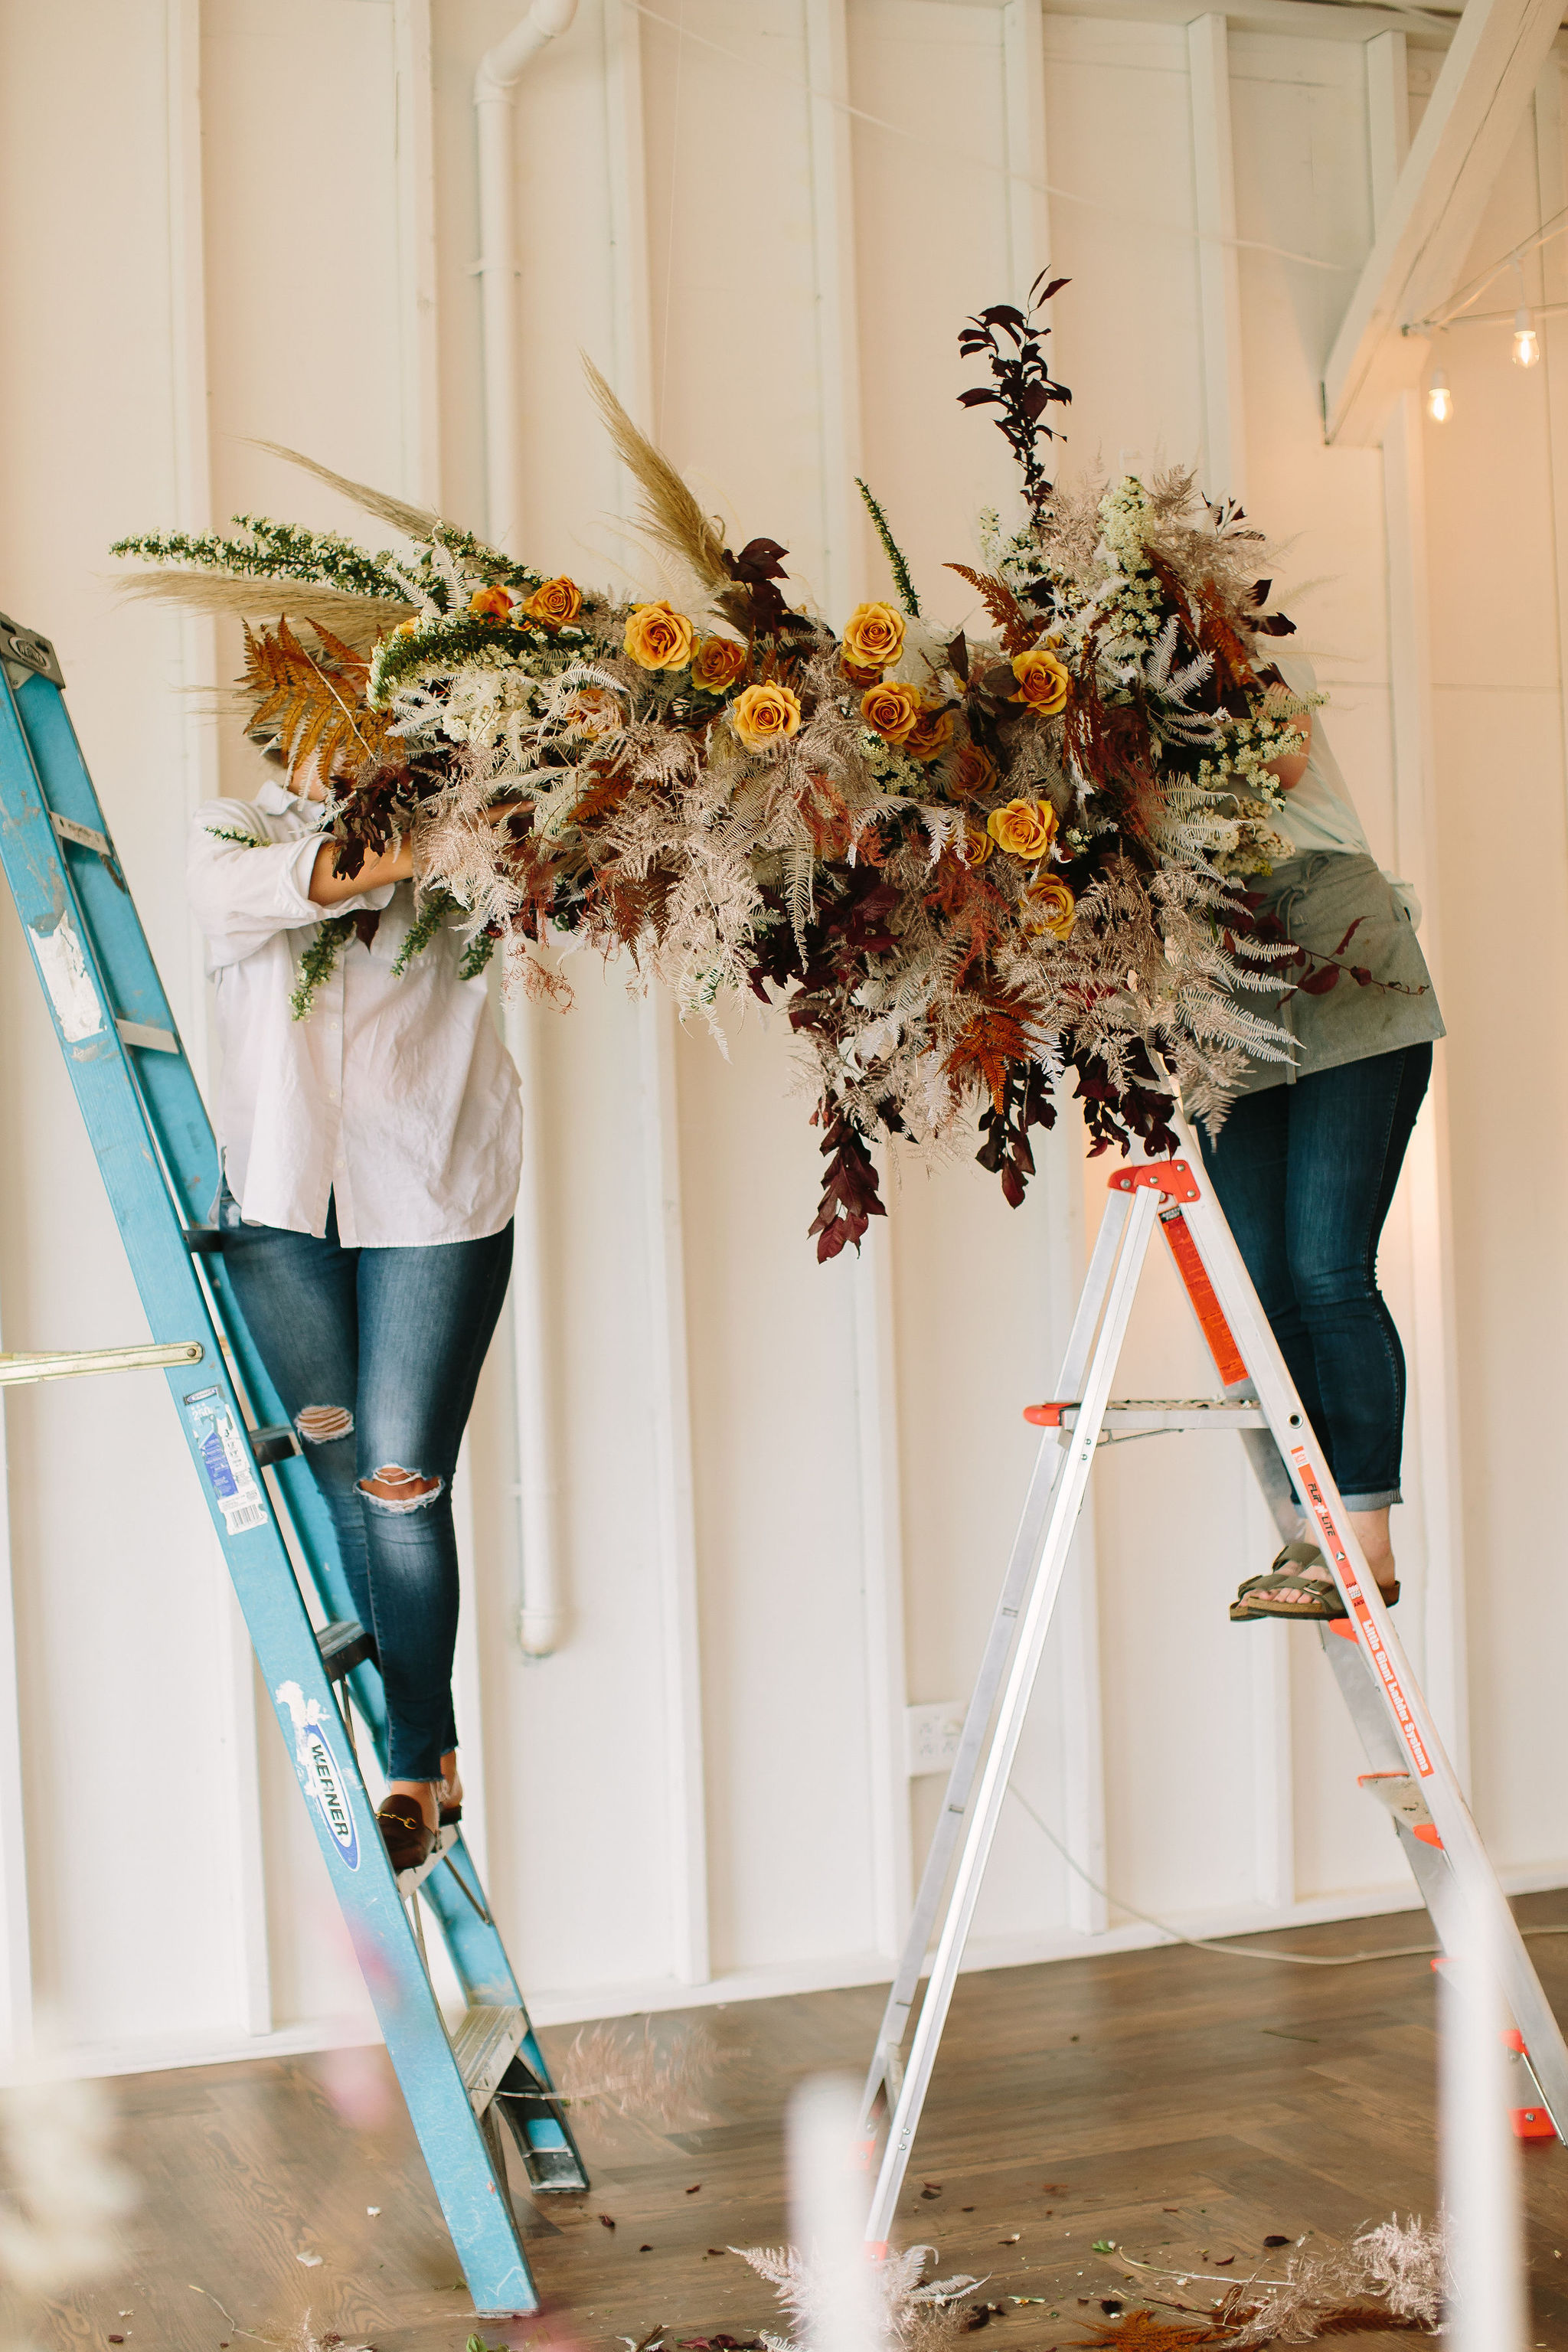 How to get started as a floral design freelancer